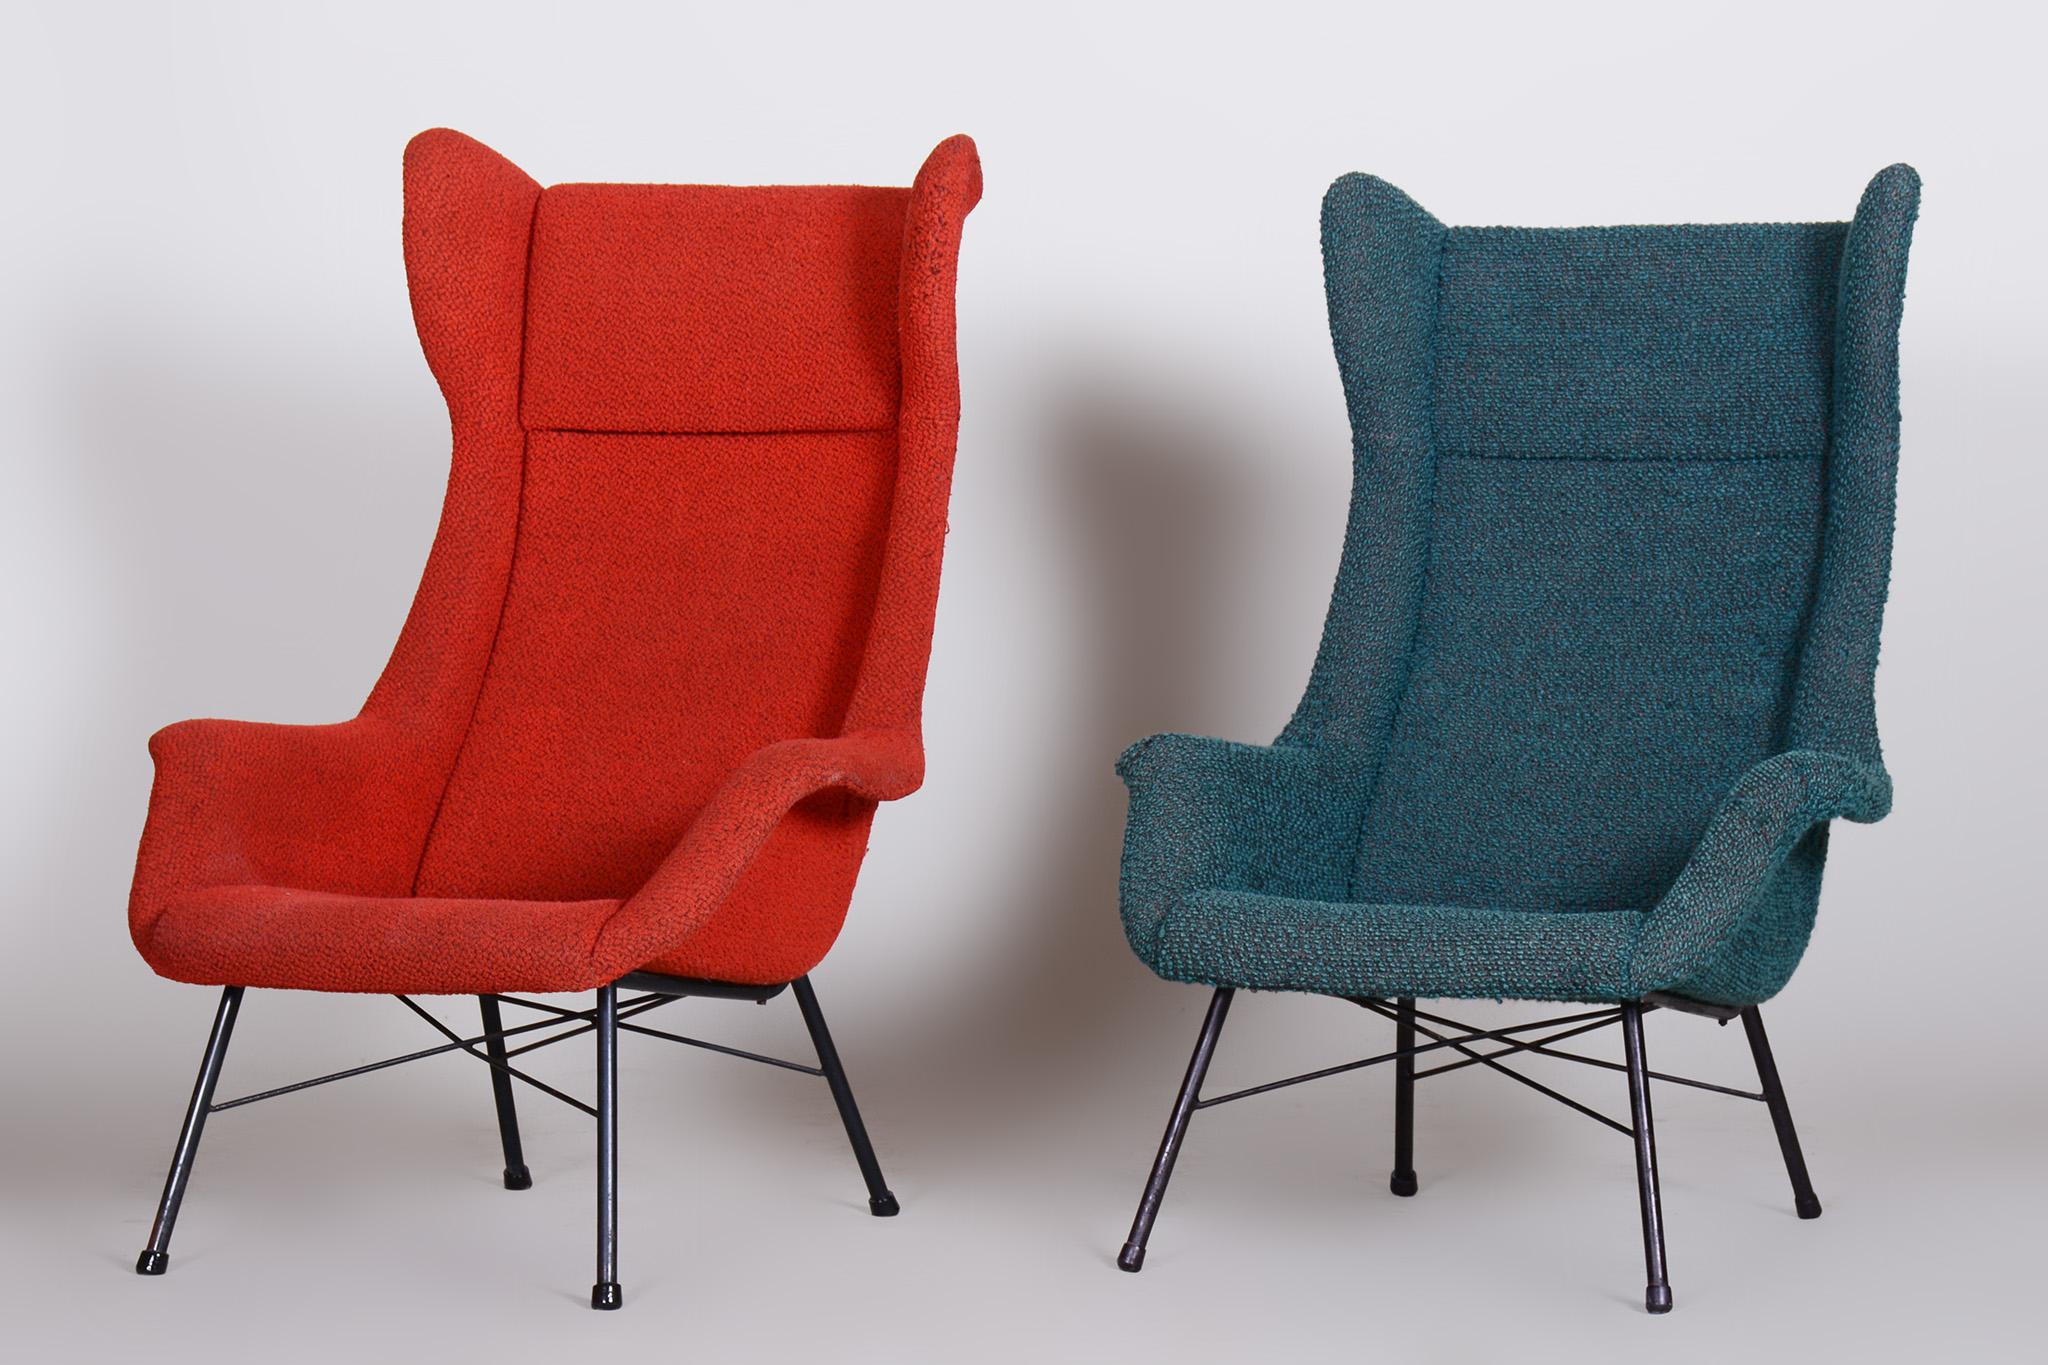 Pair of Mid Century Armchairs by Miroslav Navratil, Red and Blue, 1950s, Czechia In Good Condition In Horomerice, CZ